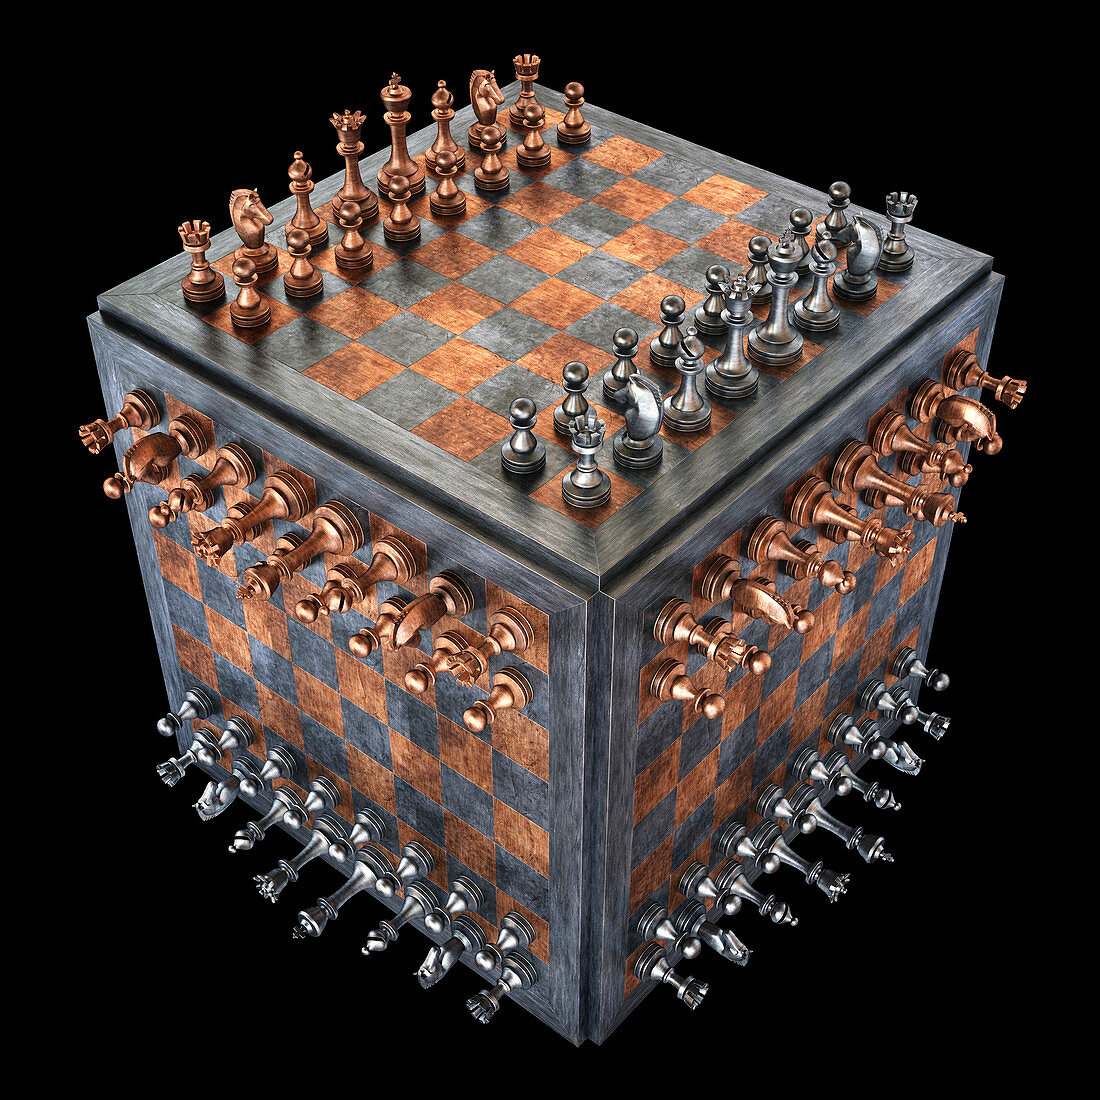 Chess board in a cube shape,illustration